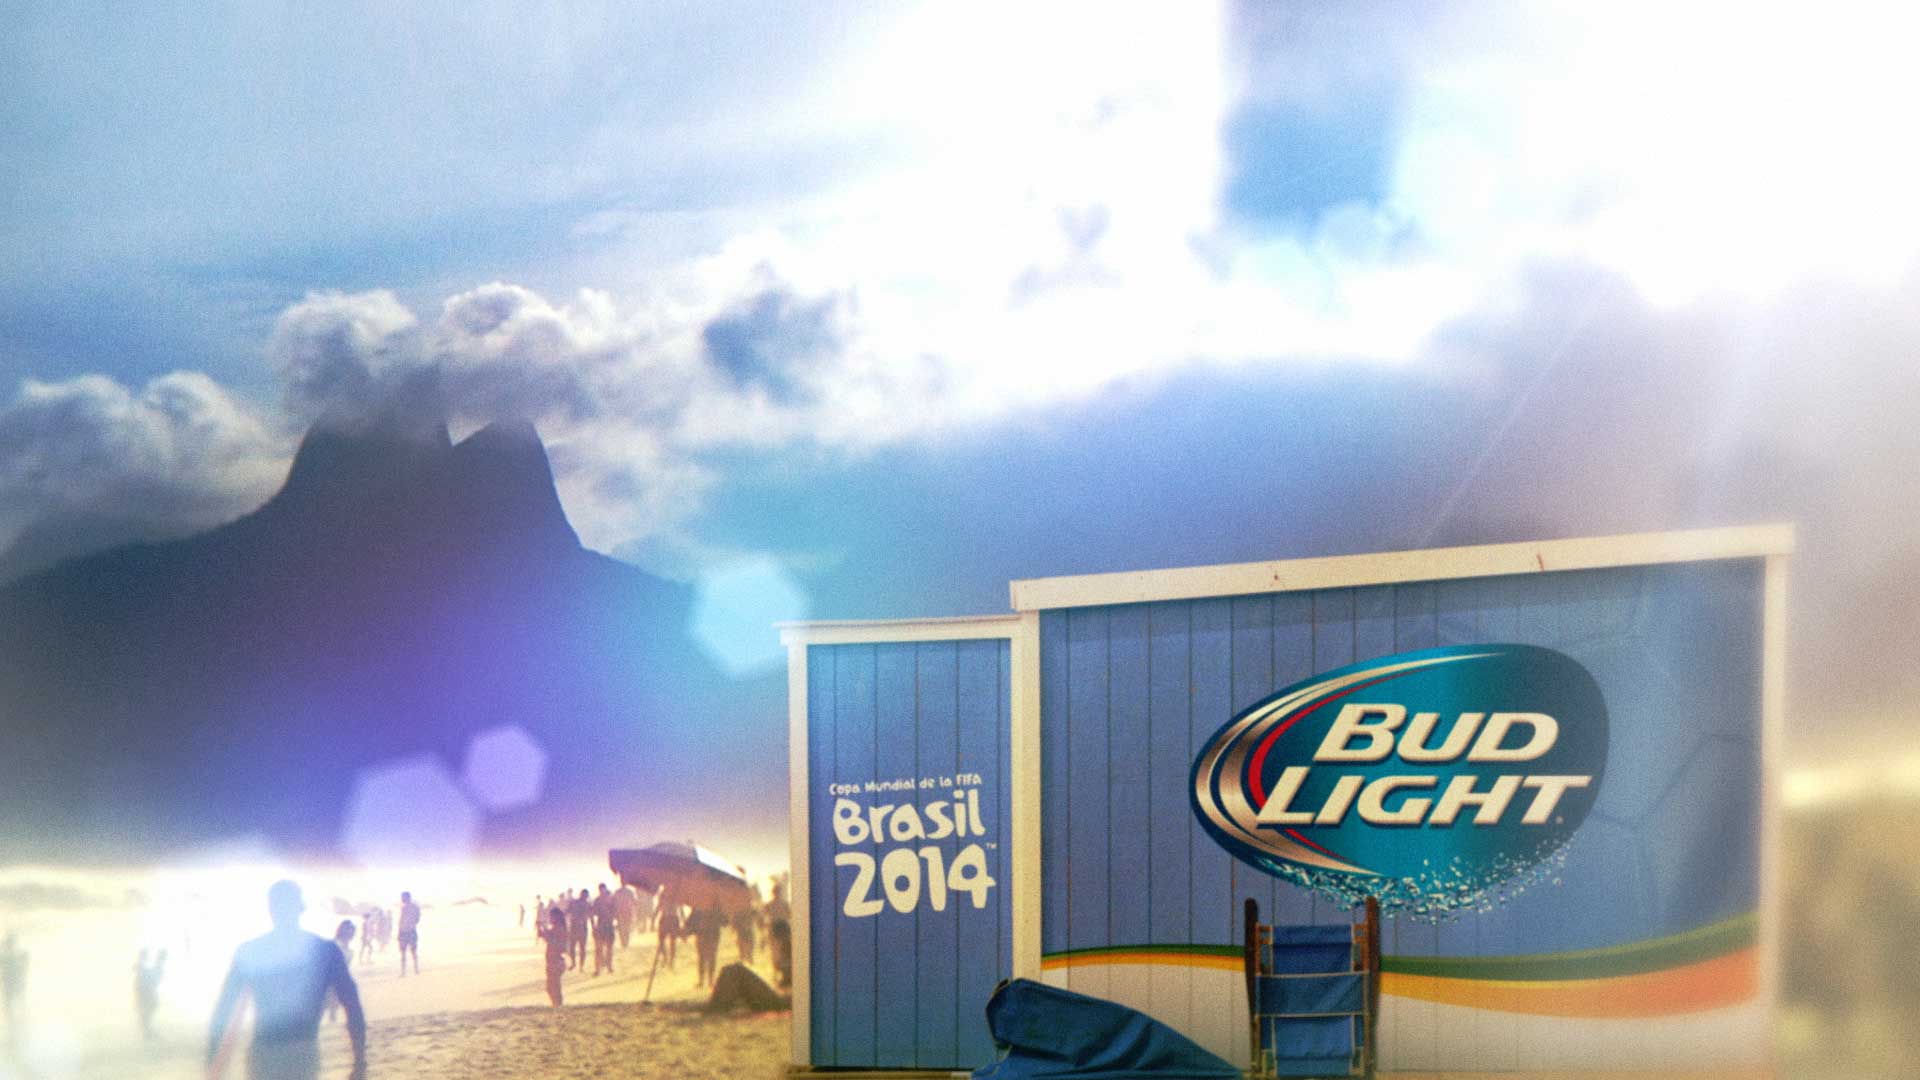 Budlight World Cup